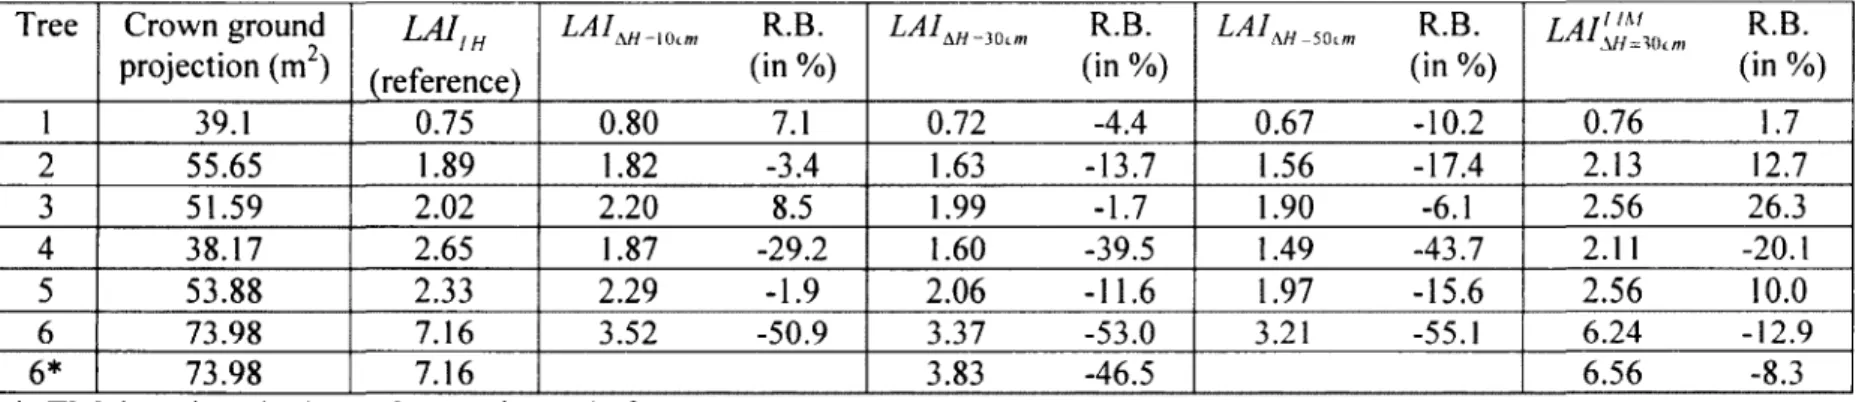 Table 3 - Tree LAI values computed using the TLS-based leaf area estimates at different voxel resolutions (AH), with and without  applying the light transmission model (LAl^^im &gt;  an ^  LAIAHI-WM  respectively), and their relative biases (R.B.) to LAI v